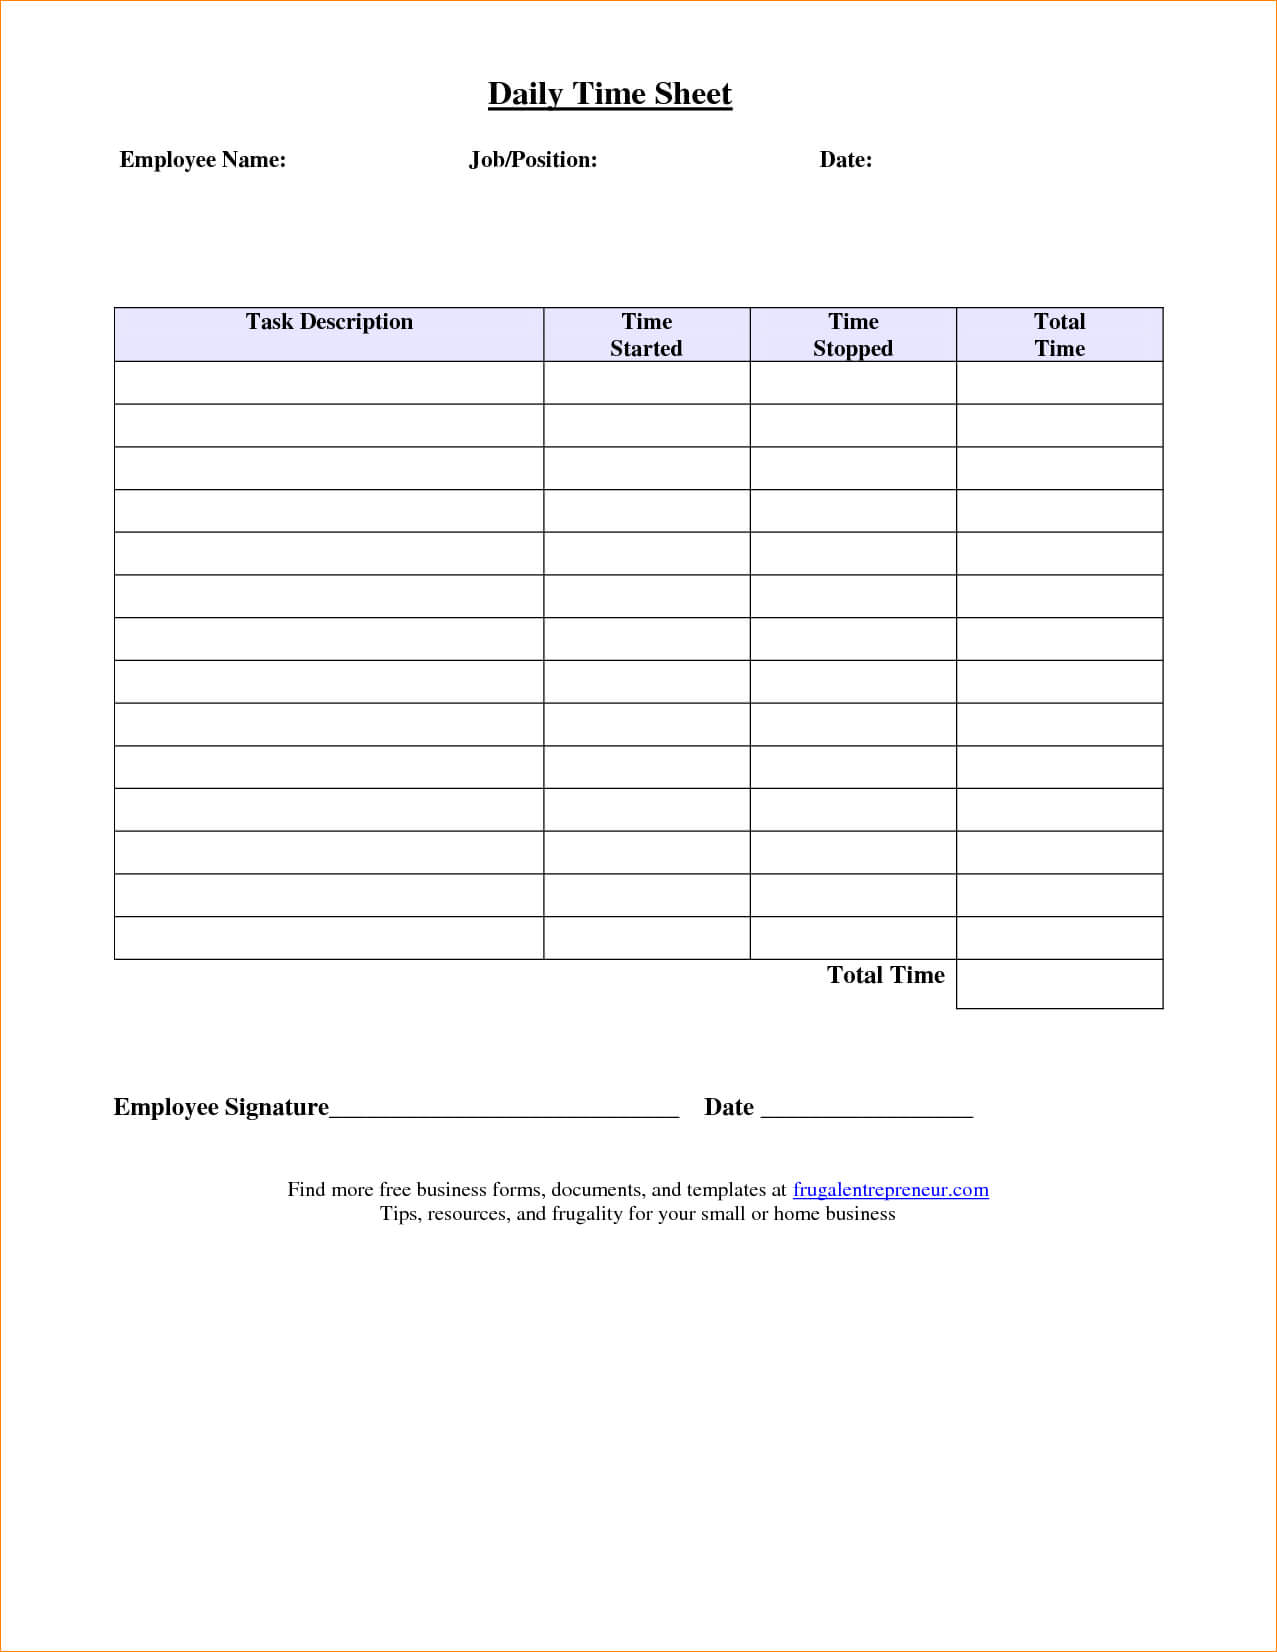 Time Sheet Sample Word | Resume Examples And Writing Tips With Regard To Weekly Time Card Template Free